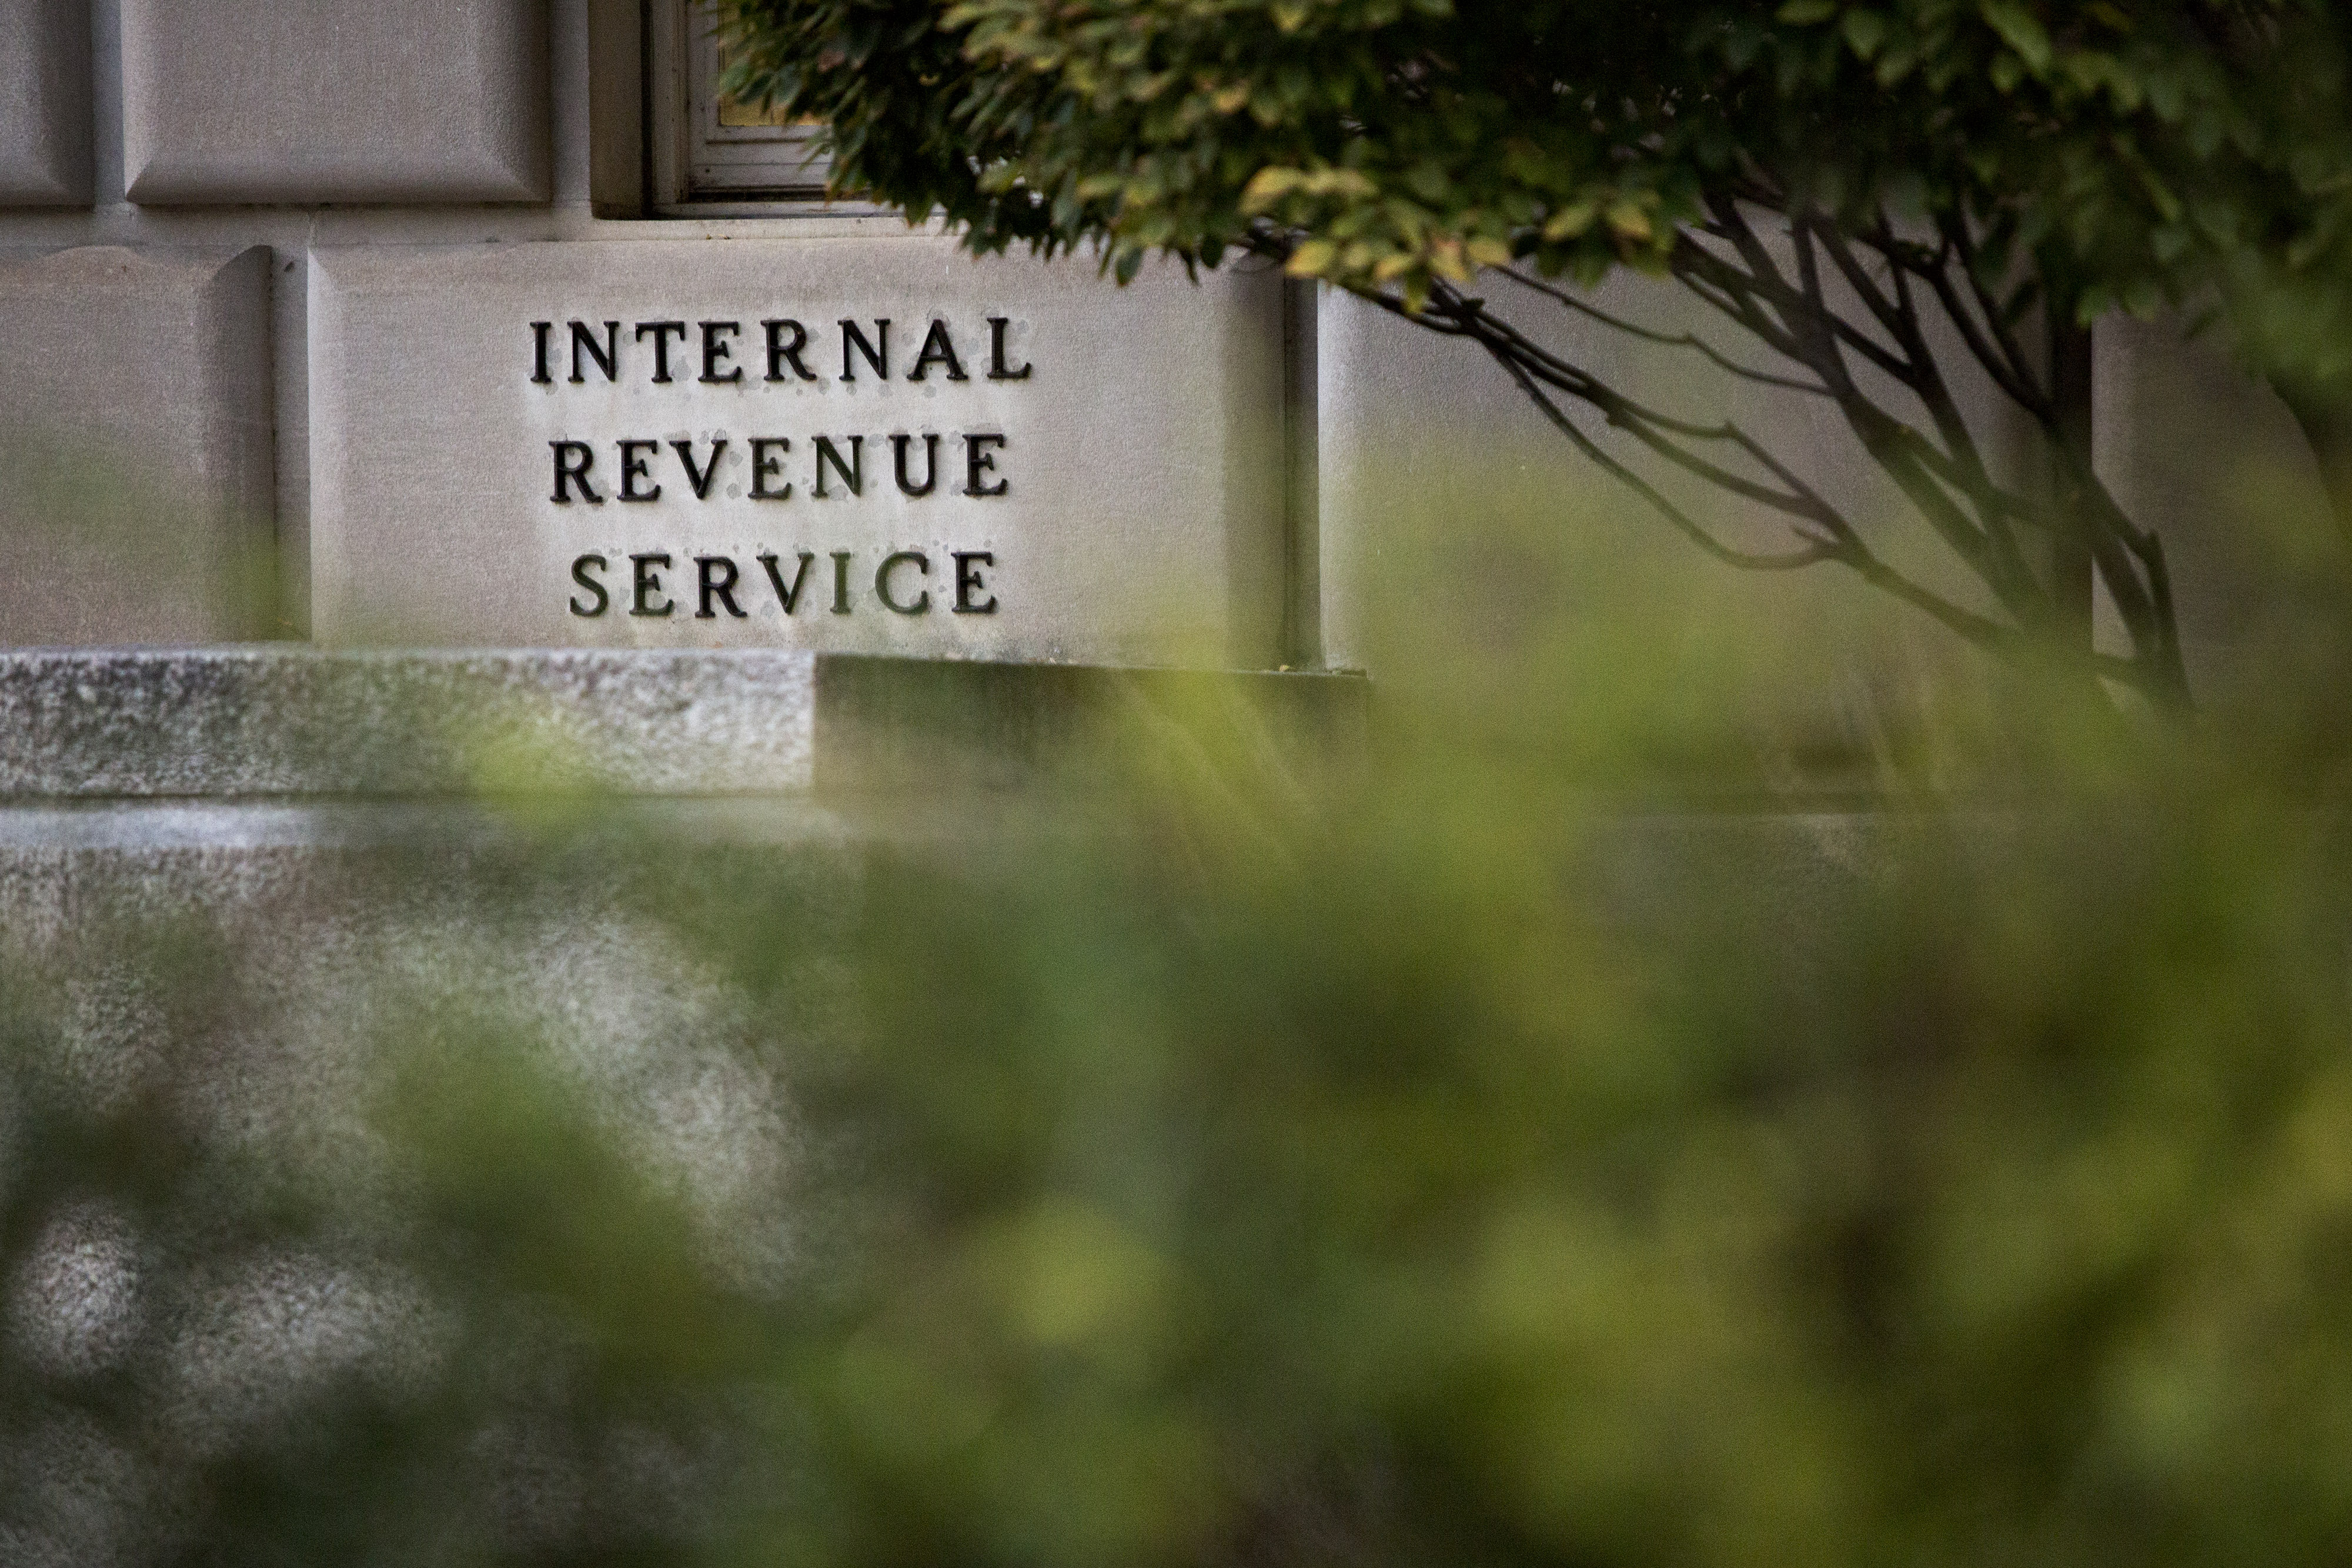 There's an 'IRS' Email Scam Going Around. Here's How to Spot It